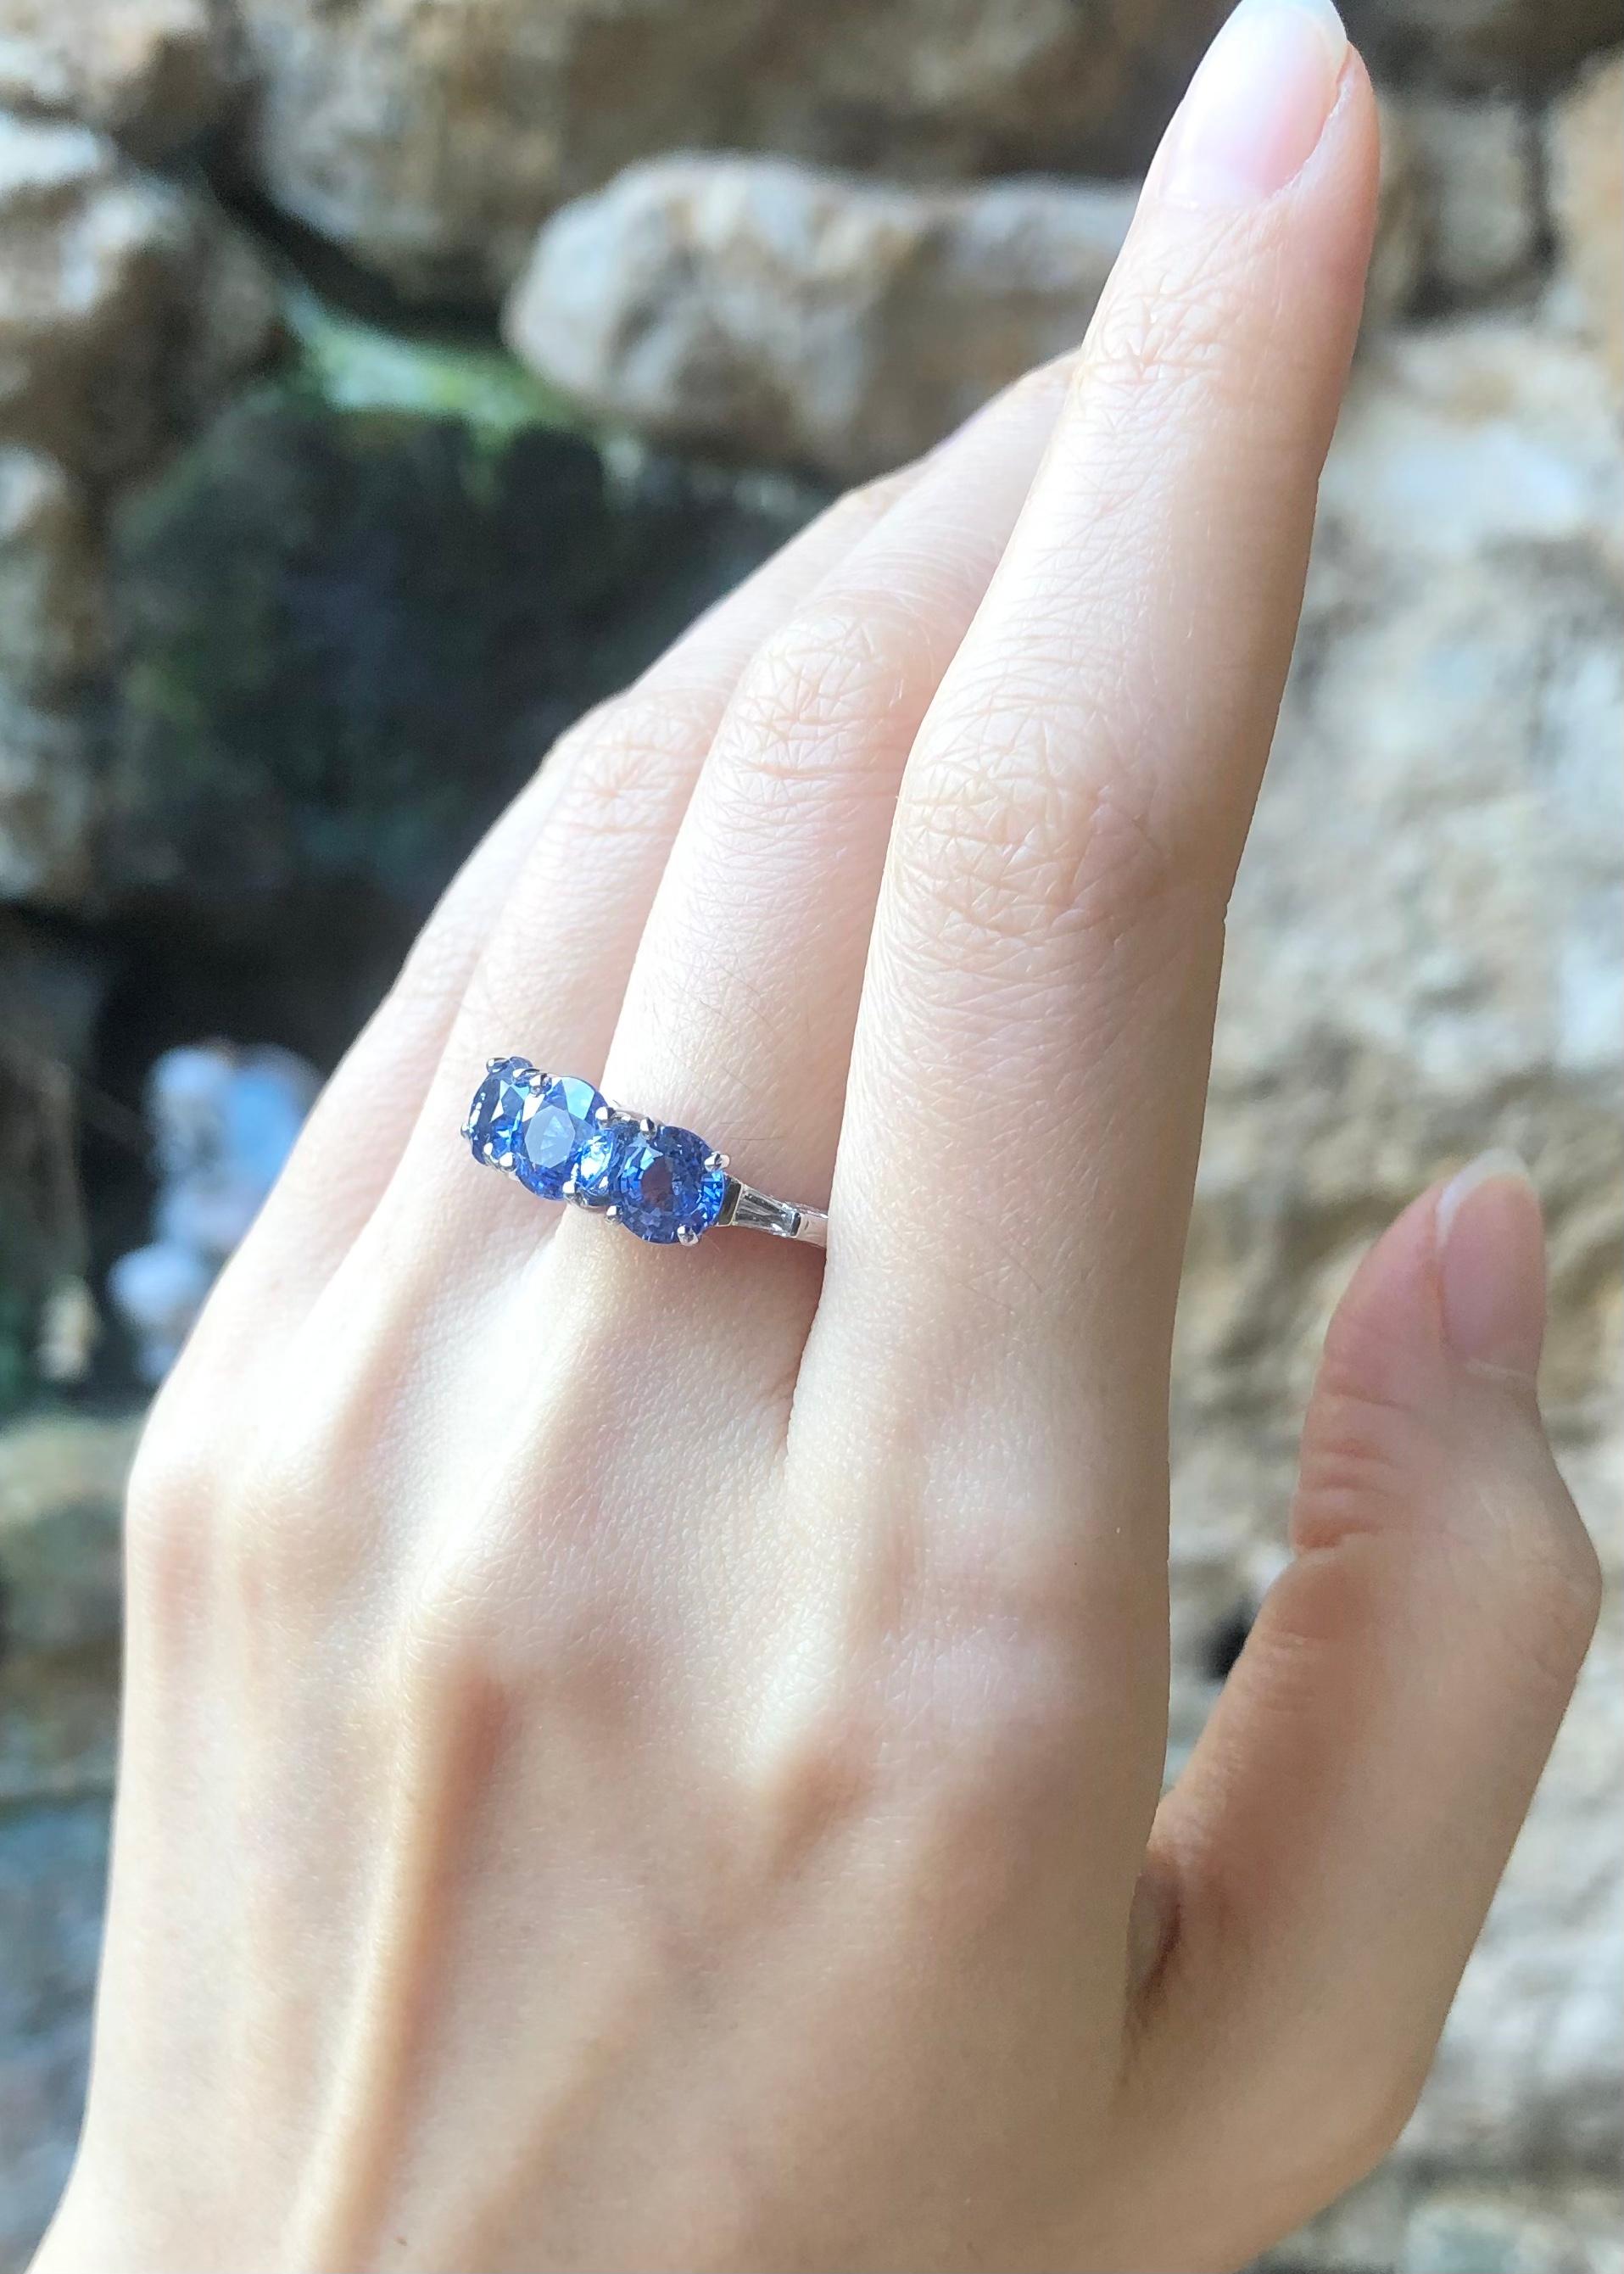 Blue Sapphire 3.25 carats with Diamond 0.09 carat Ring set in 18K White Gold Settings

Width:  1.7 cm 
Length: 0.6 cm
Ring Size: 53
Total Weight: 5.82 grams

